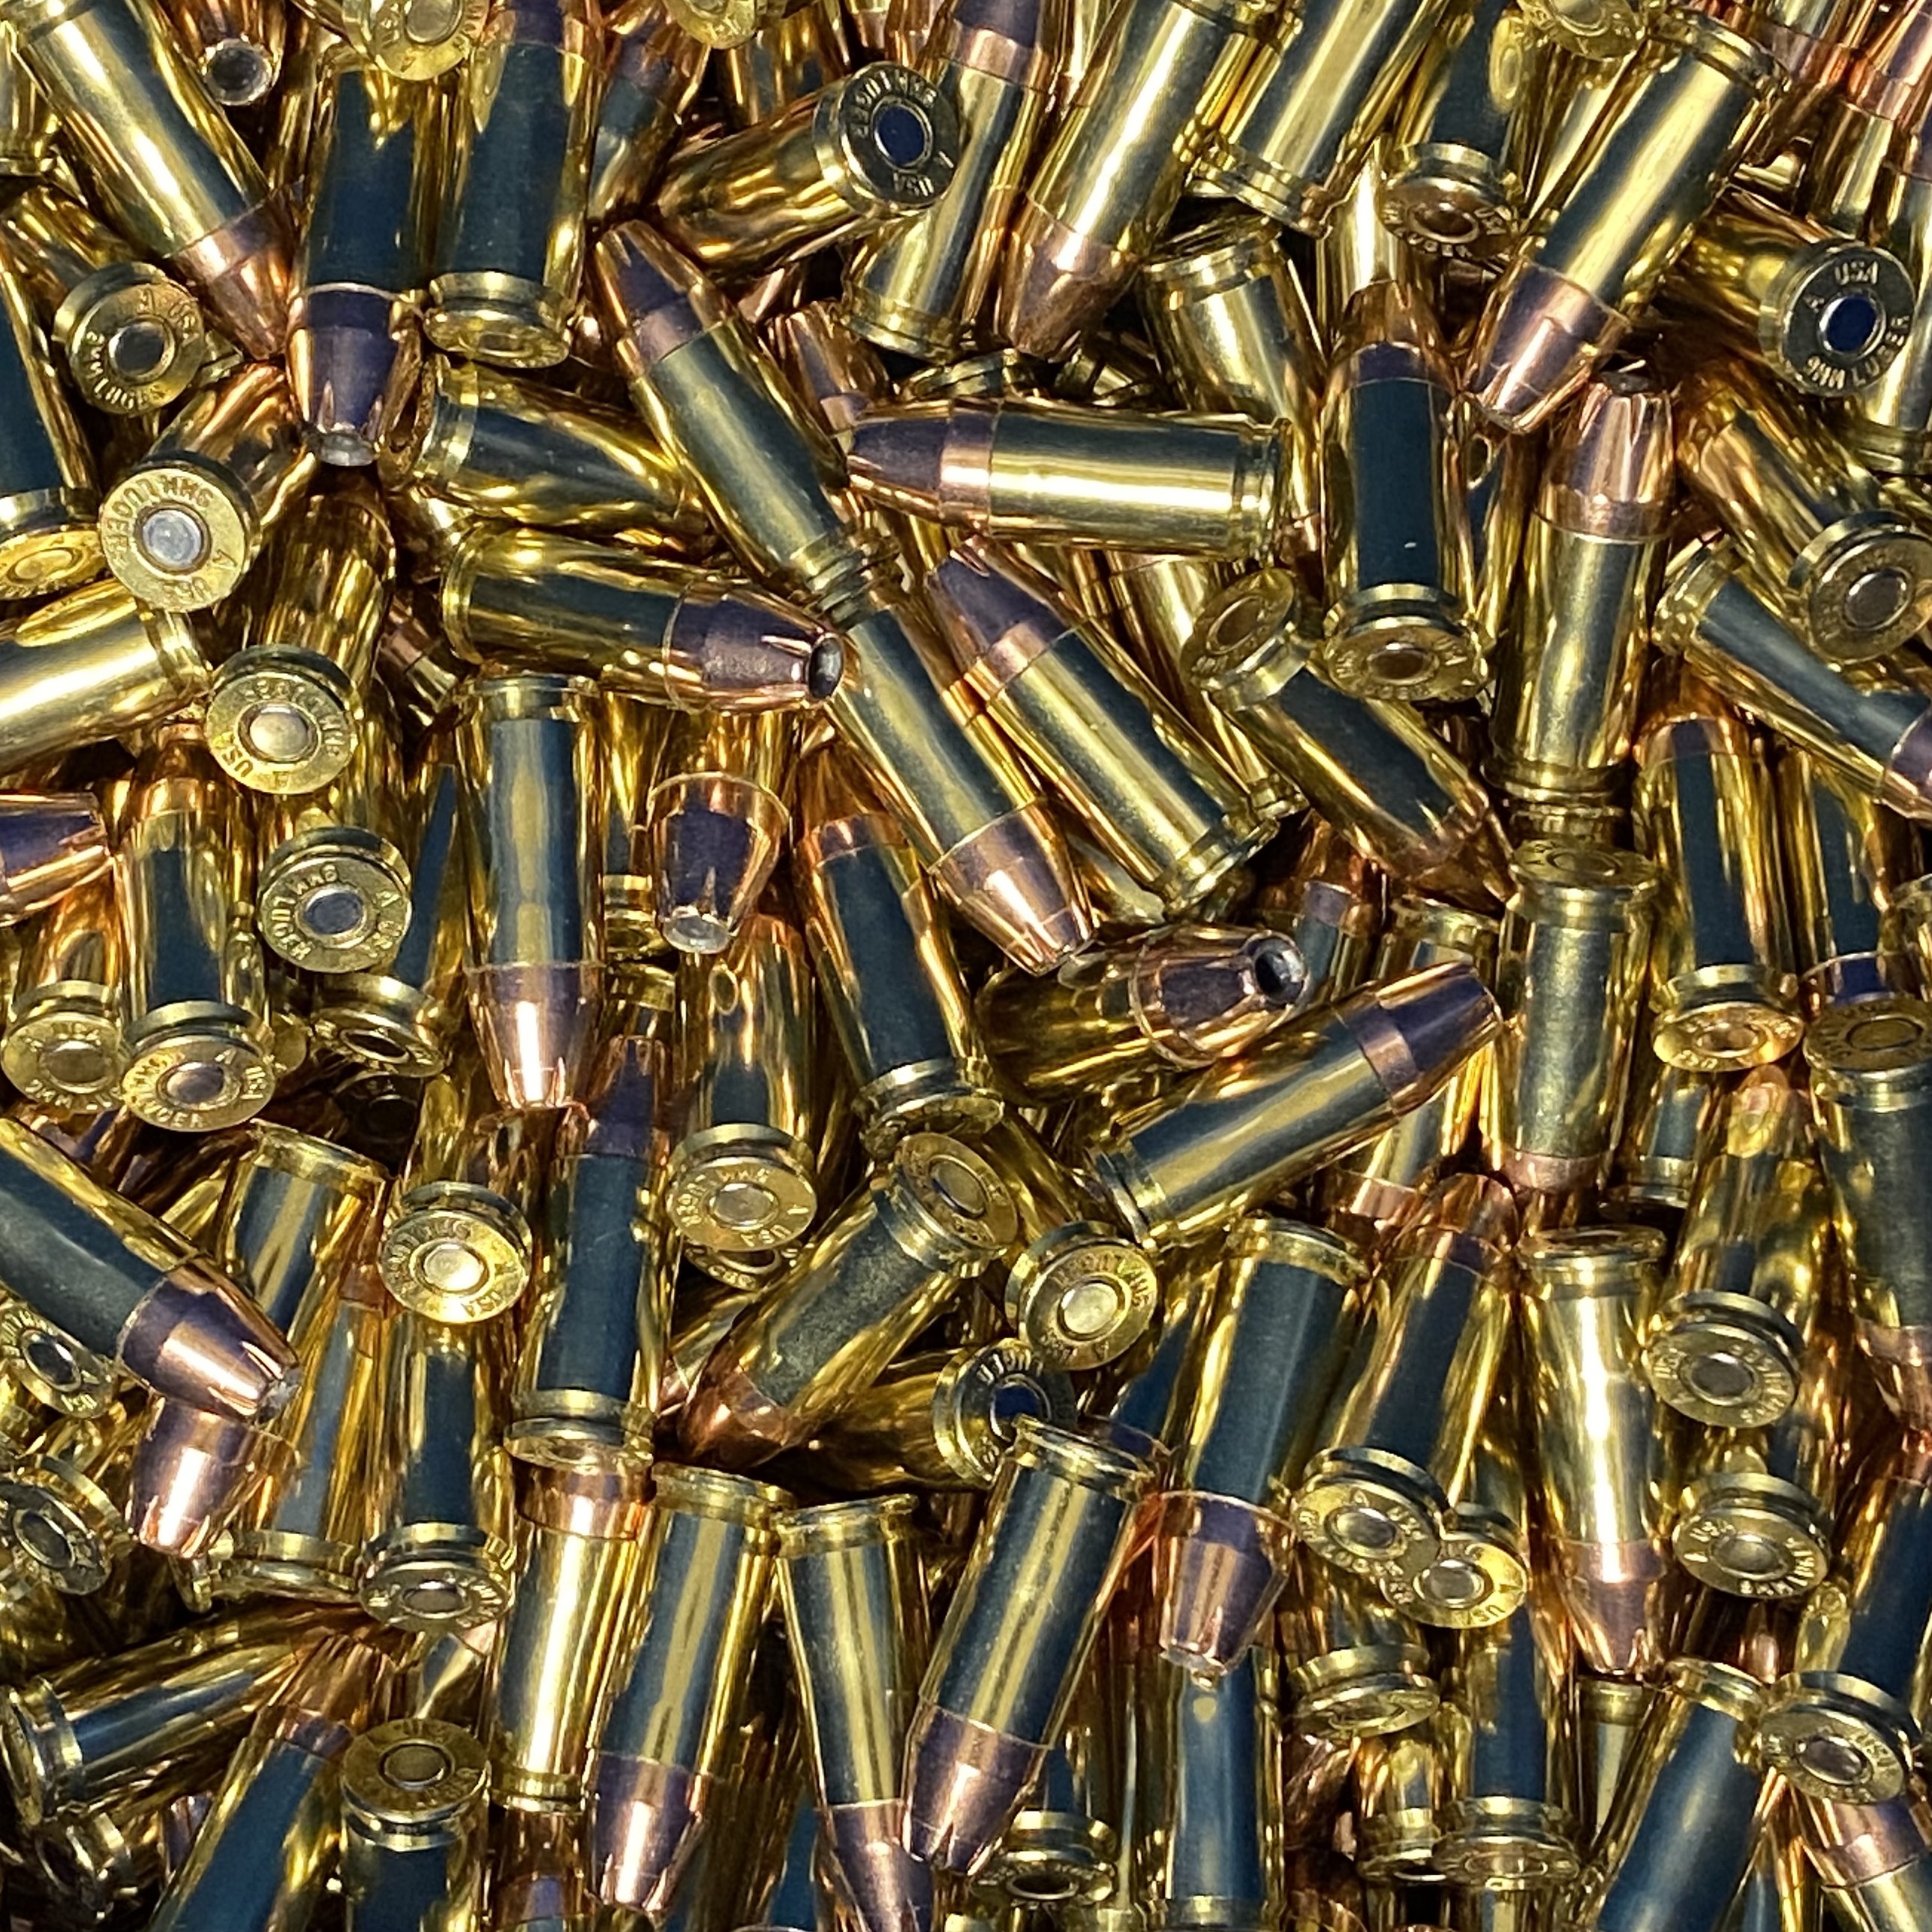 9mm Luger 115 gr. XTP Defense Loose. MEMORIAL DAY SALE! THROUGH MAY 29TH ONLY - SHIPS NBD